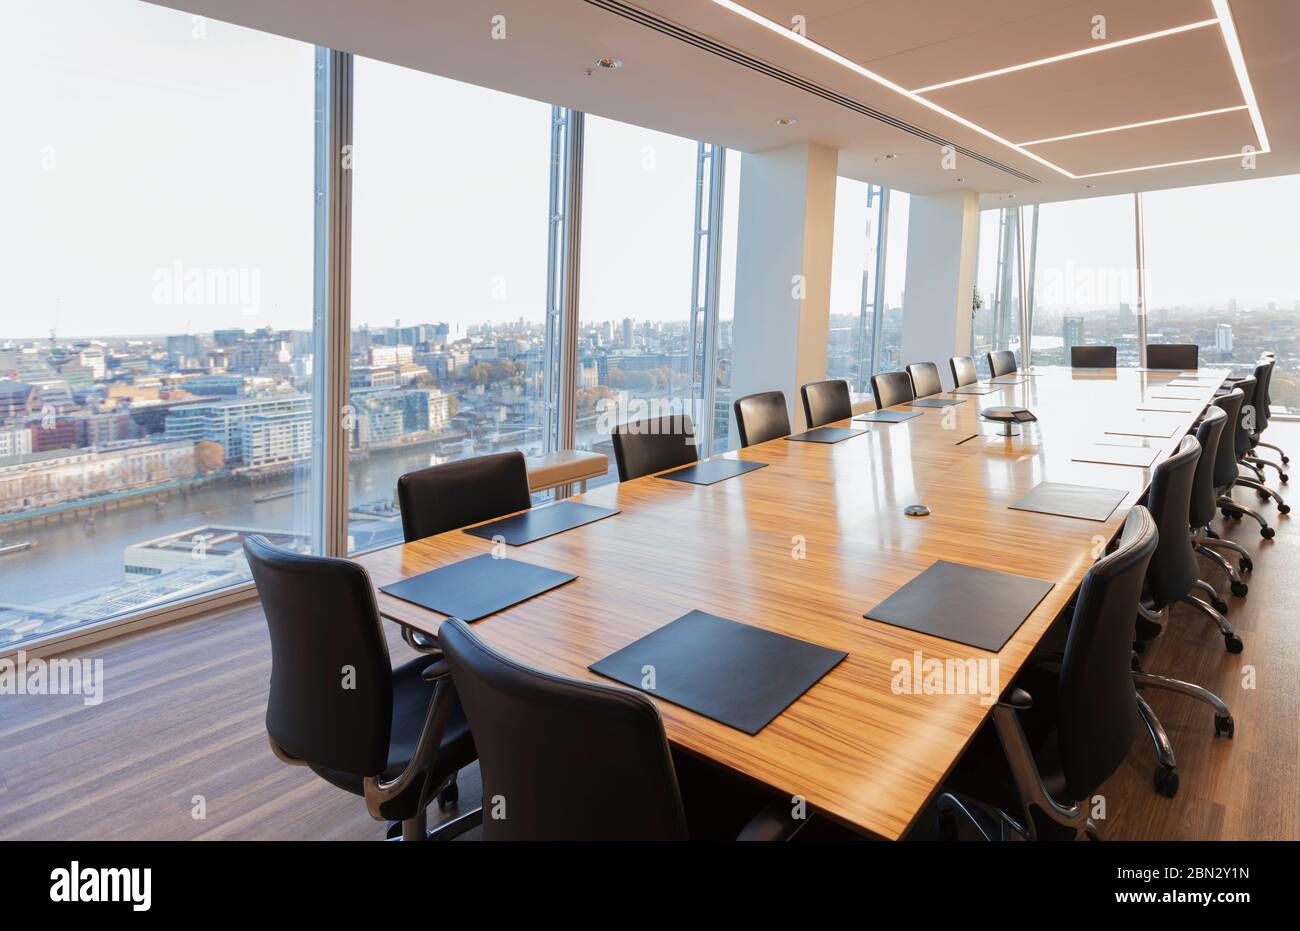 Long conference table in modern highrise office overlooking city Stock Photo